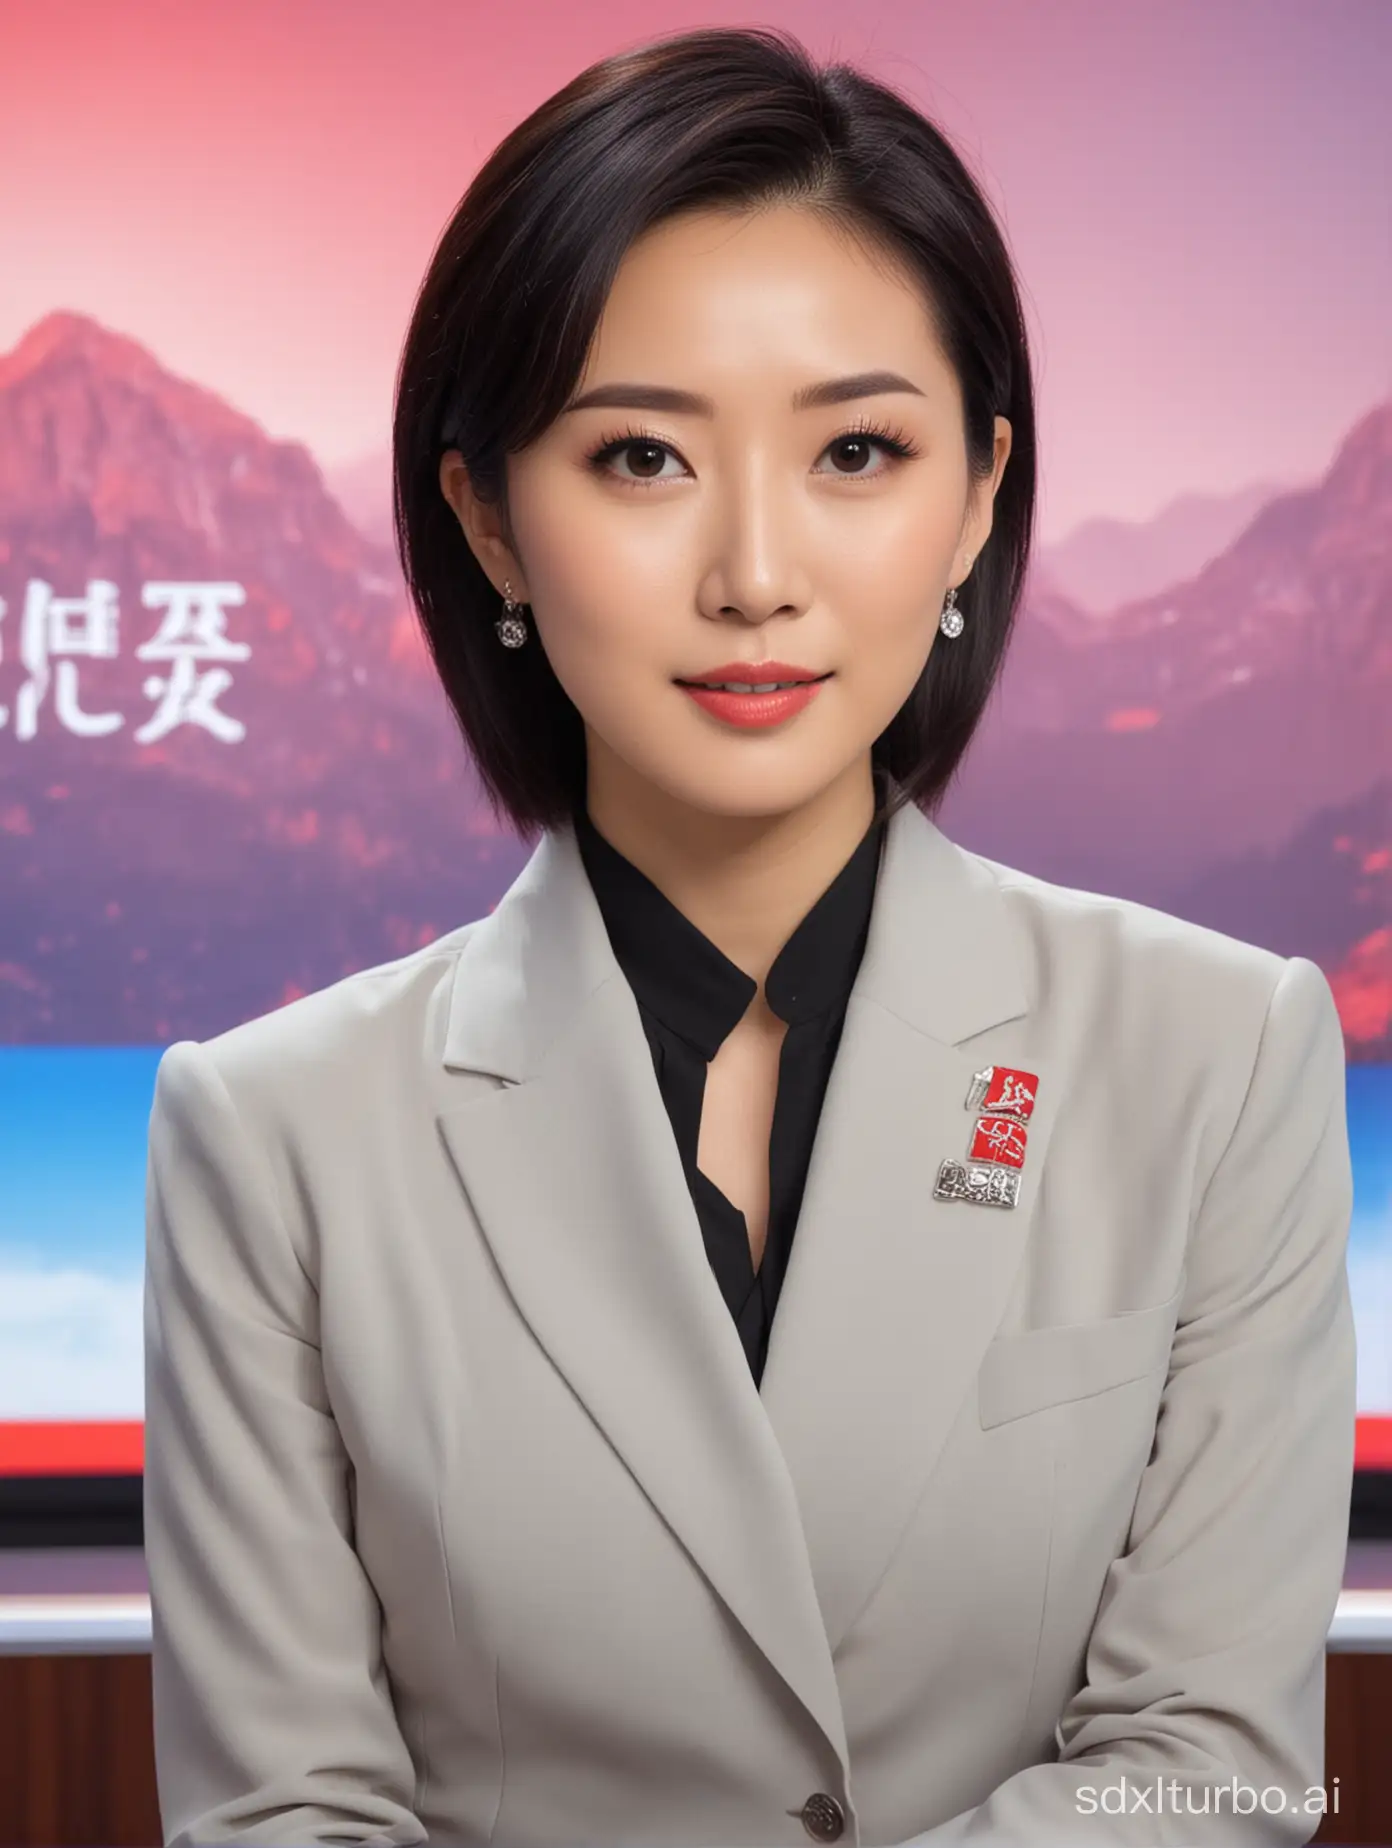 A Chinese beauty wearing professional attire, news anchor, looking at the camera, with the background of the Xinwen Lianbo (News Broadcast) backdrop, mid shot